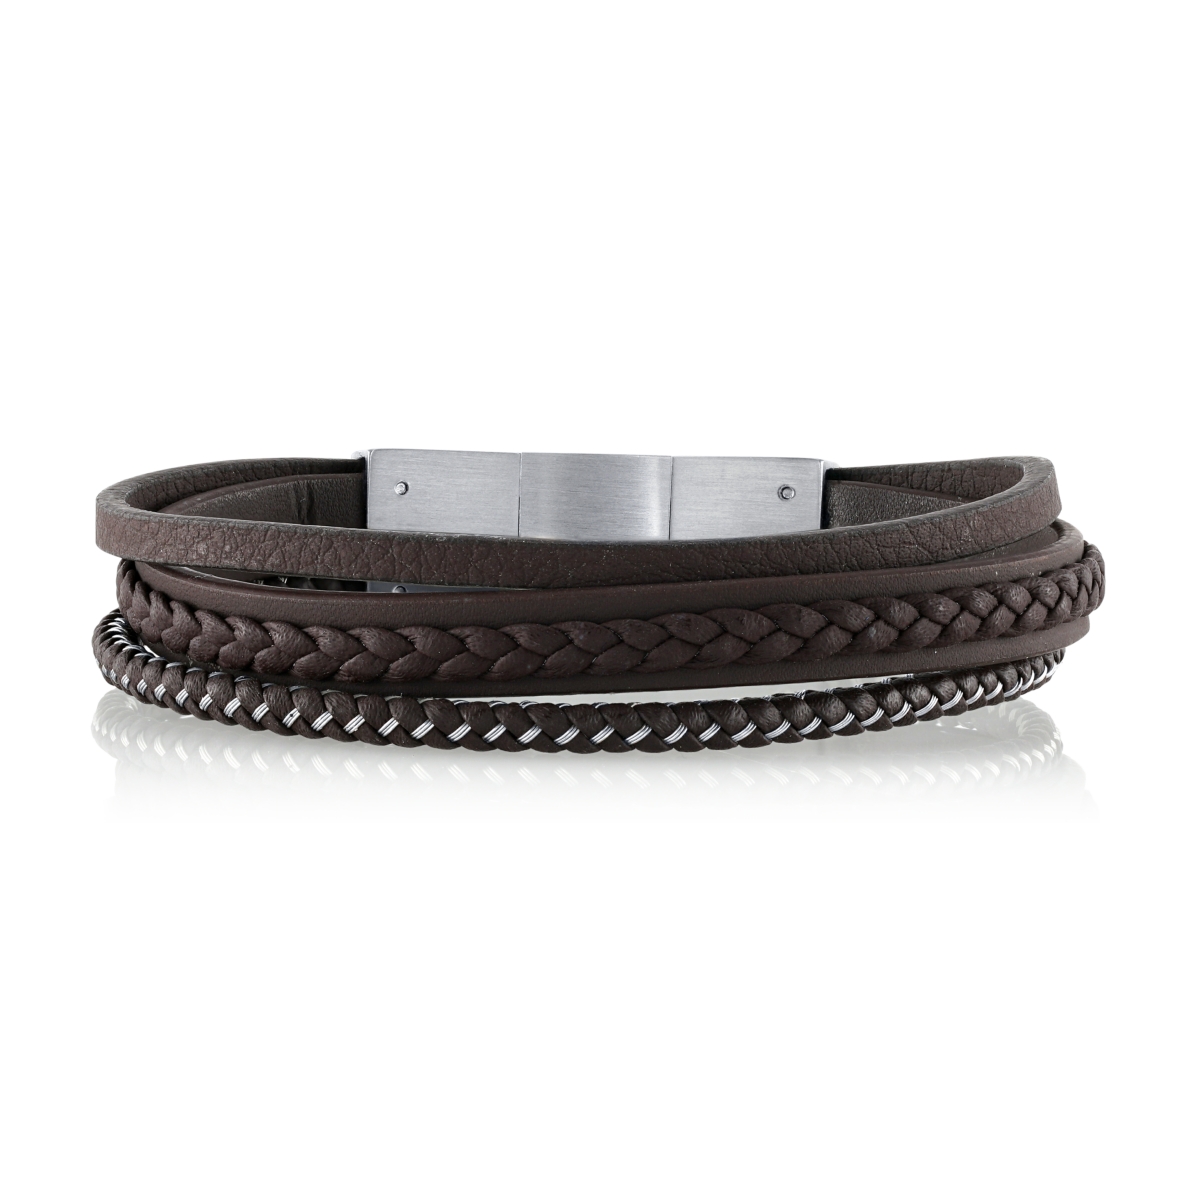 He Rocks Brown Leather and Stainless Steel Triple Wrap Bracelet, 8.5"